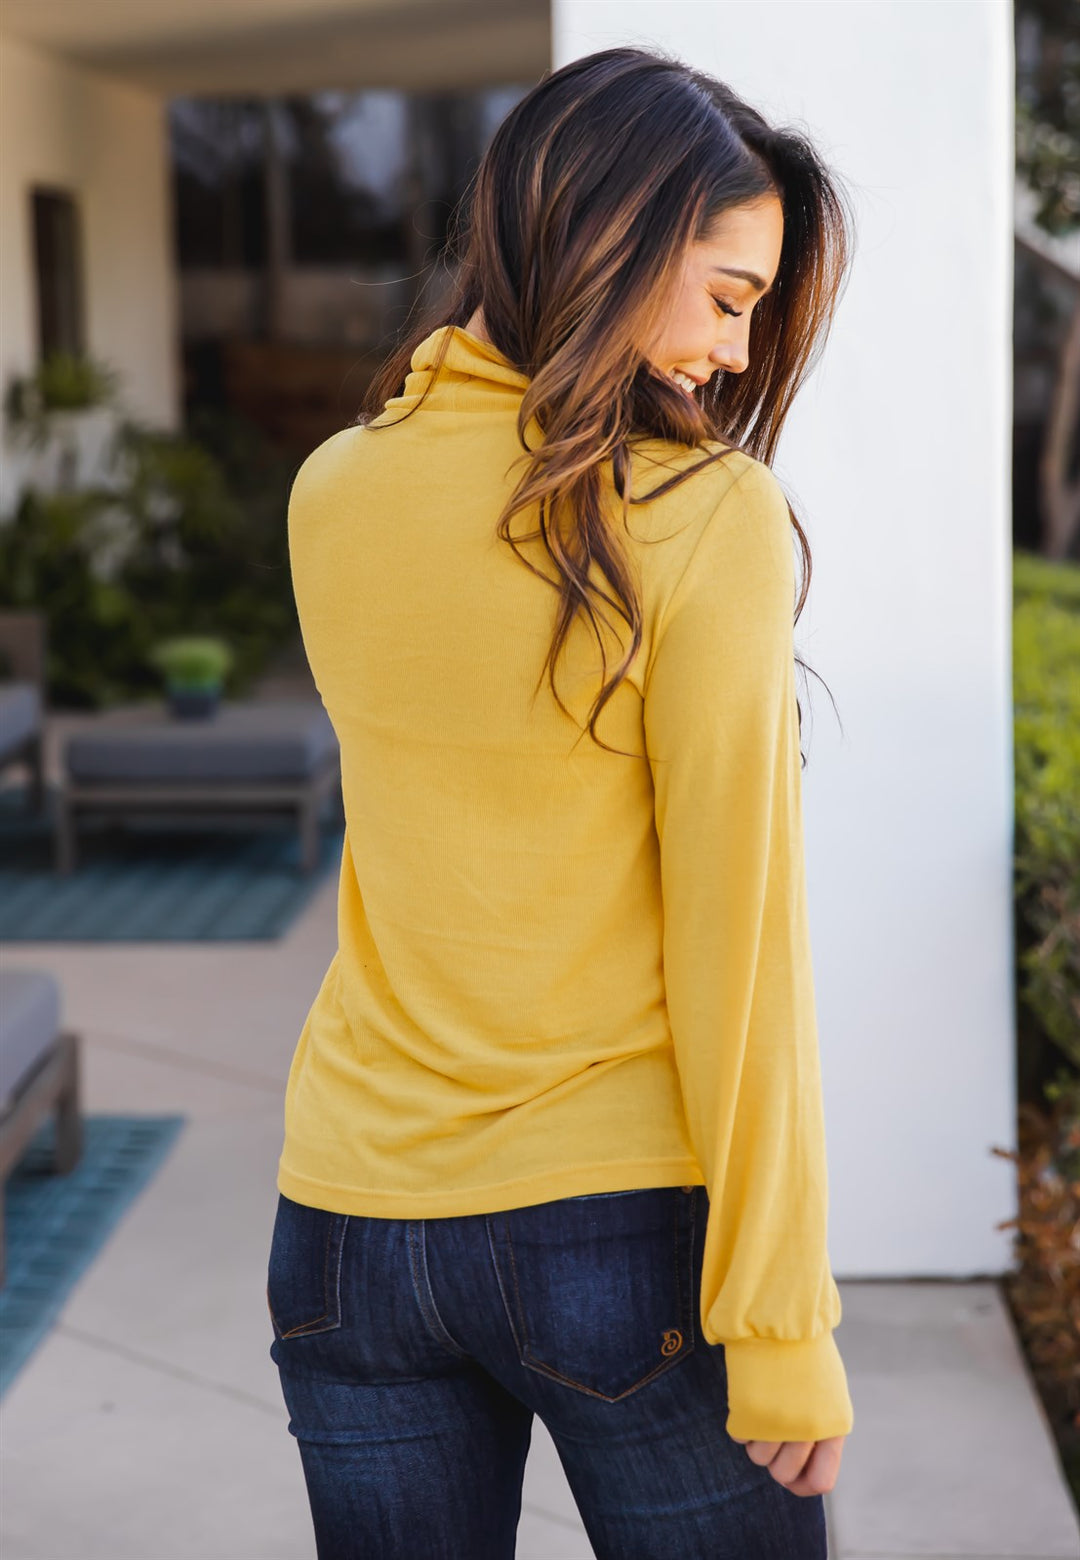 Cowl Neck Asher Top